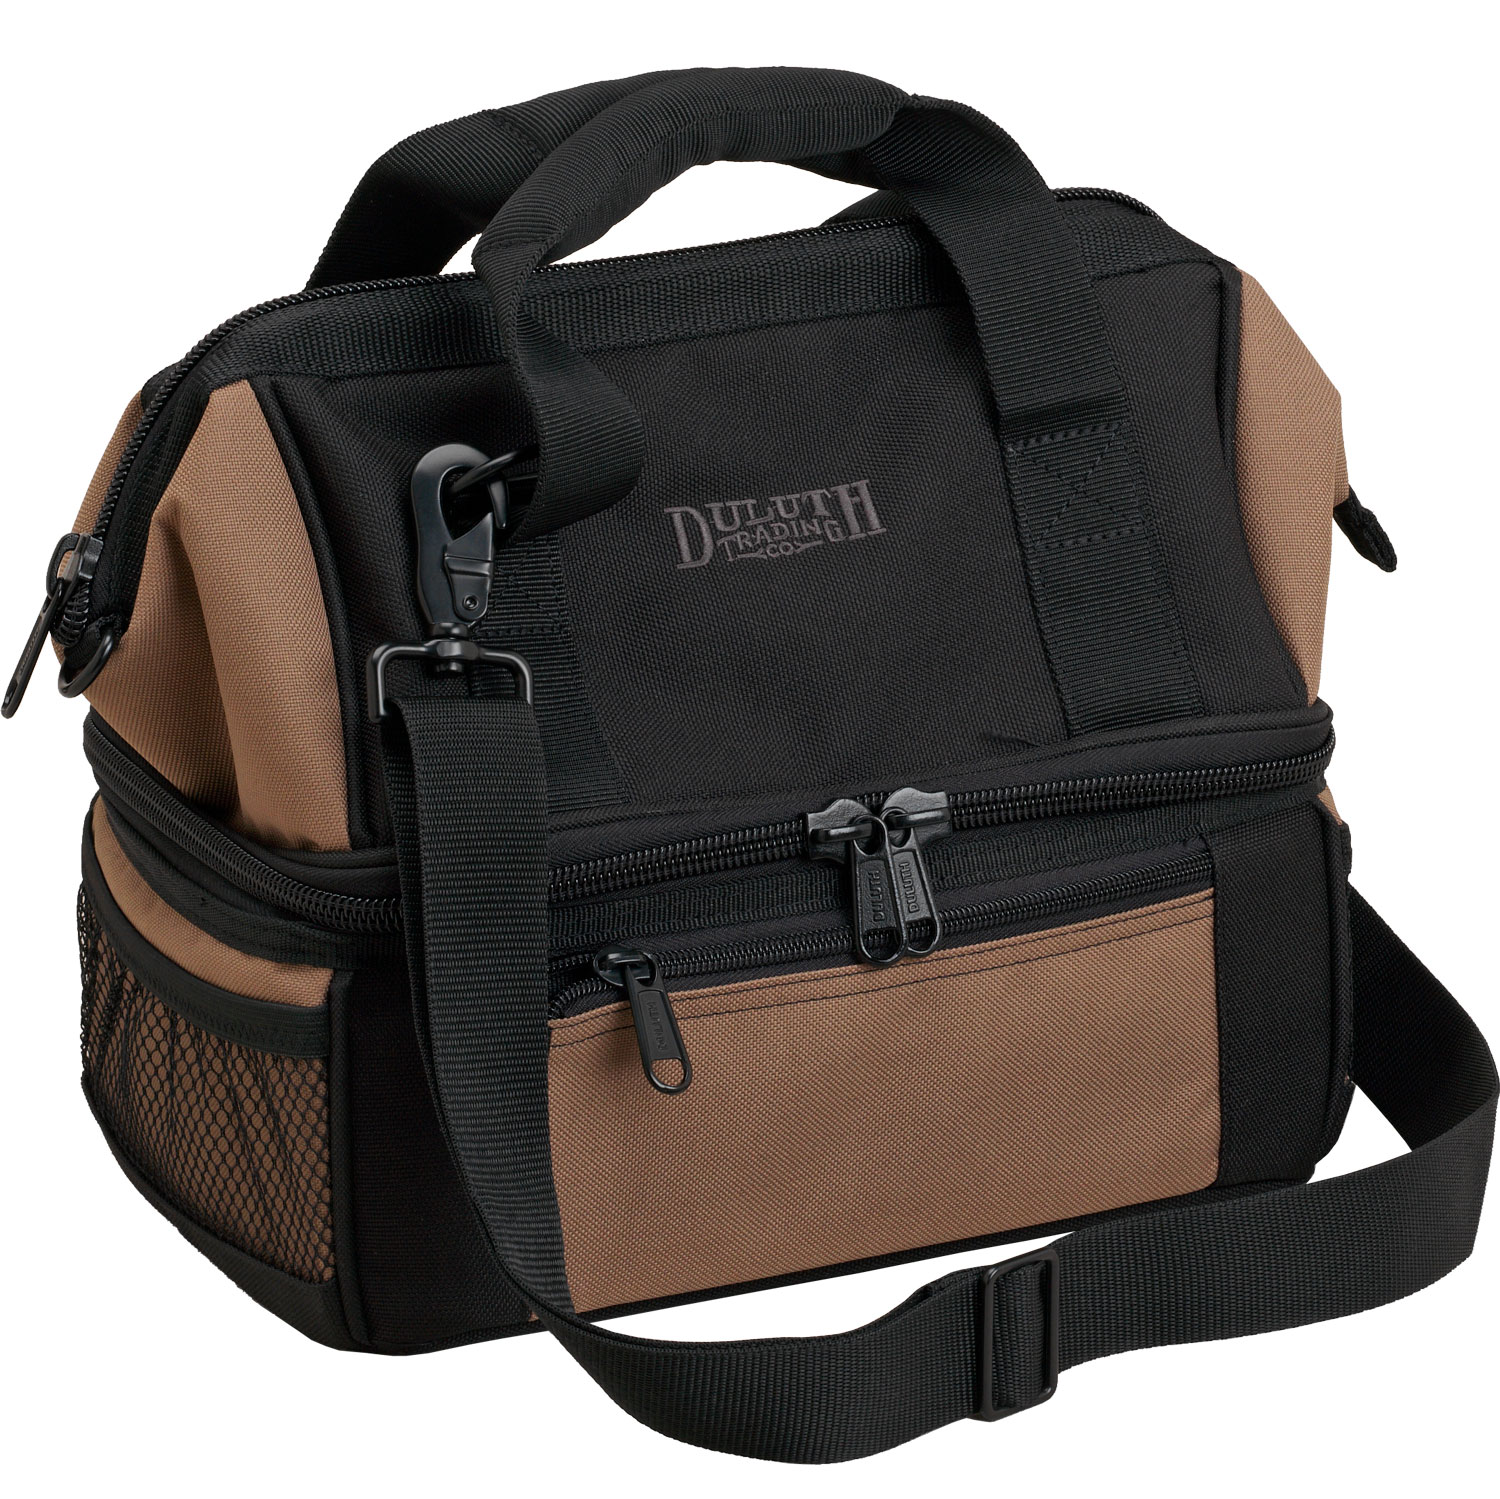 Louie's Lunch Box - Brown - Duluth Trading Company